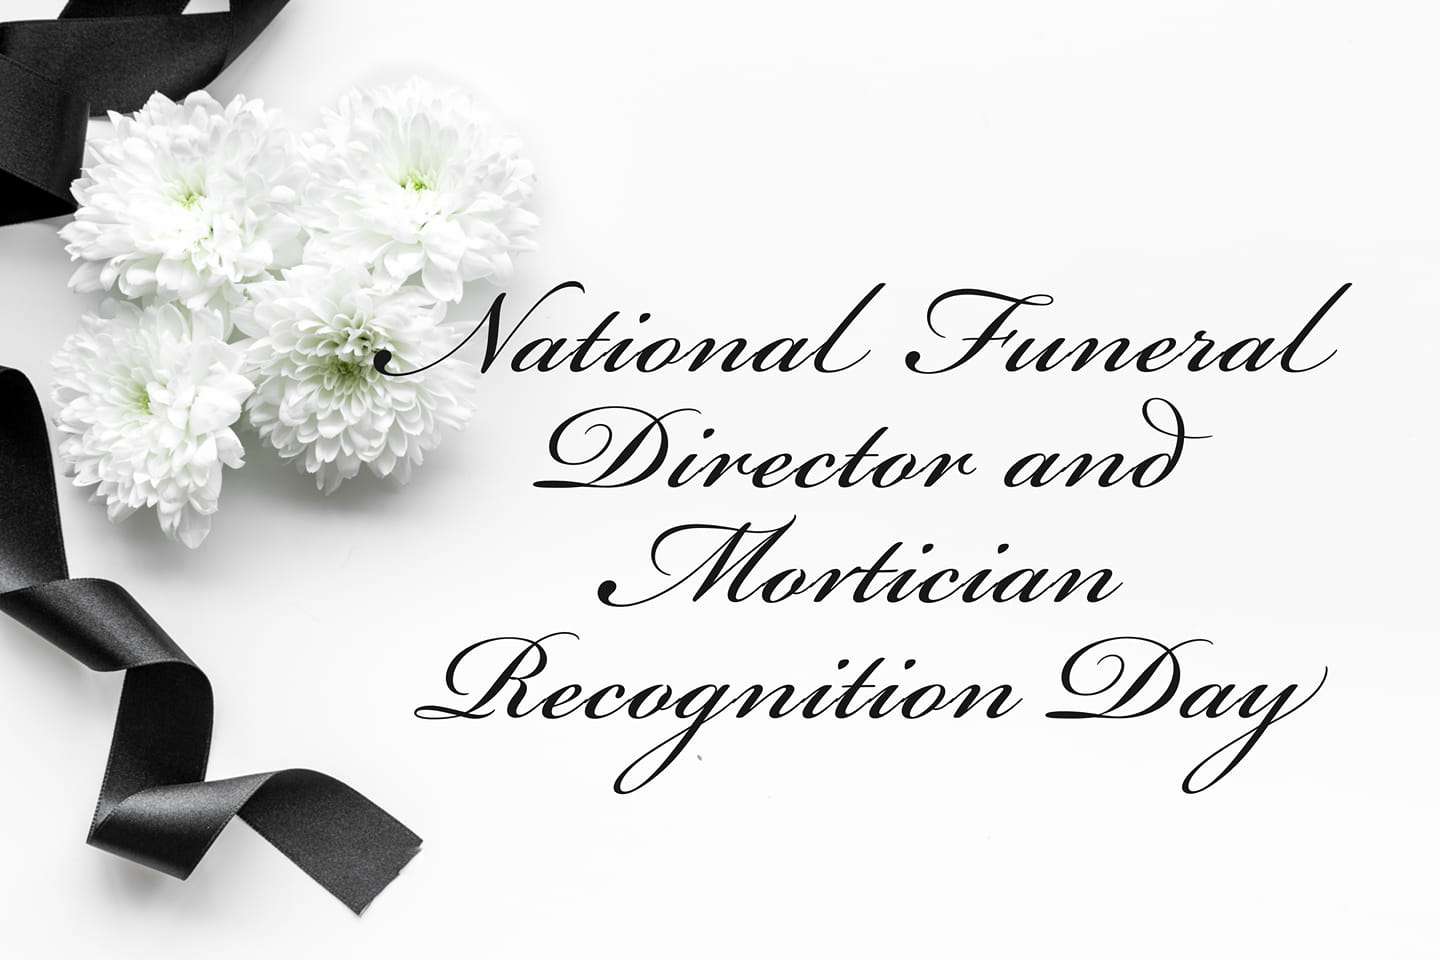 National Funeral Director and Mortician Recognition Day Wishes Images download